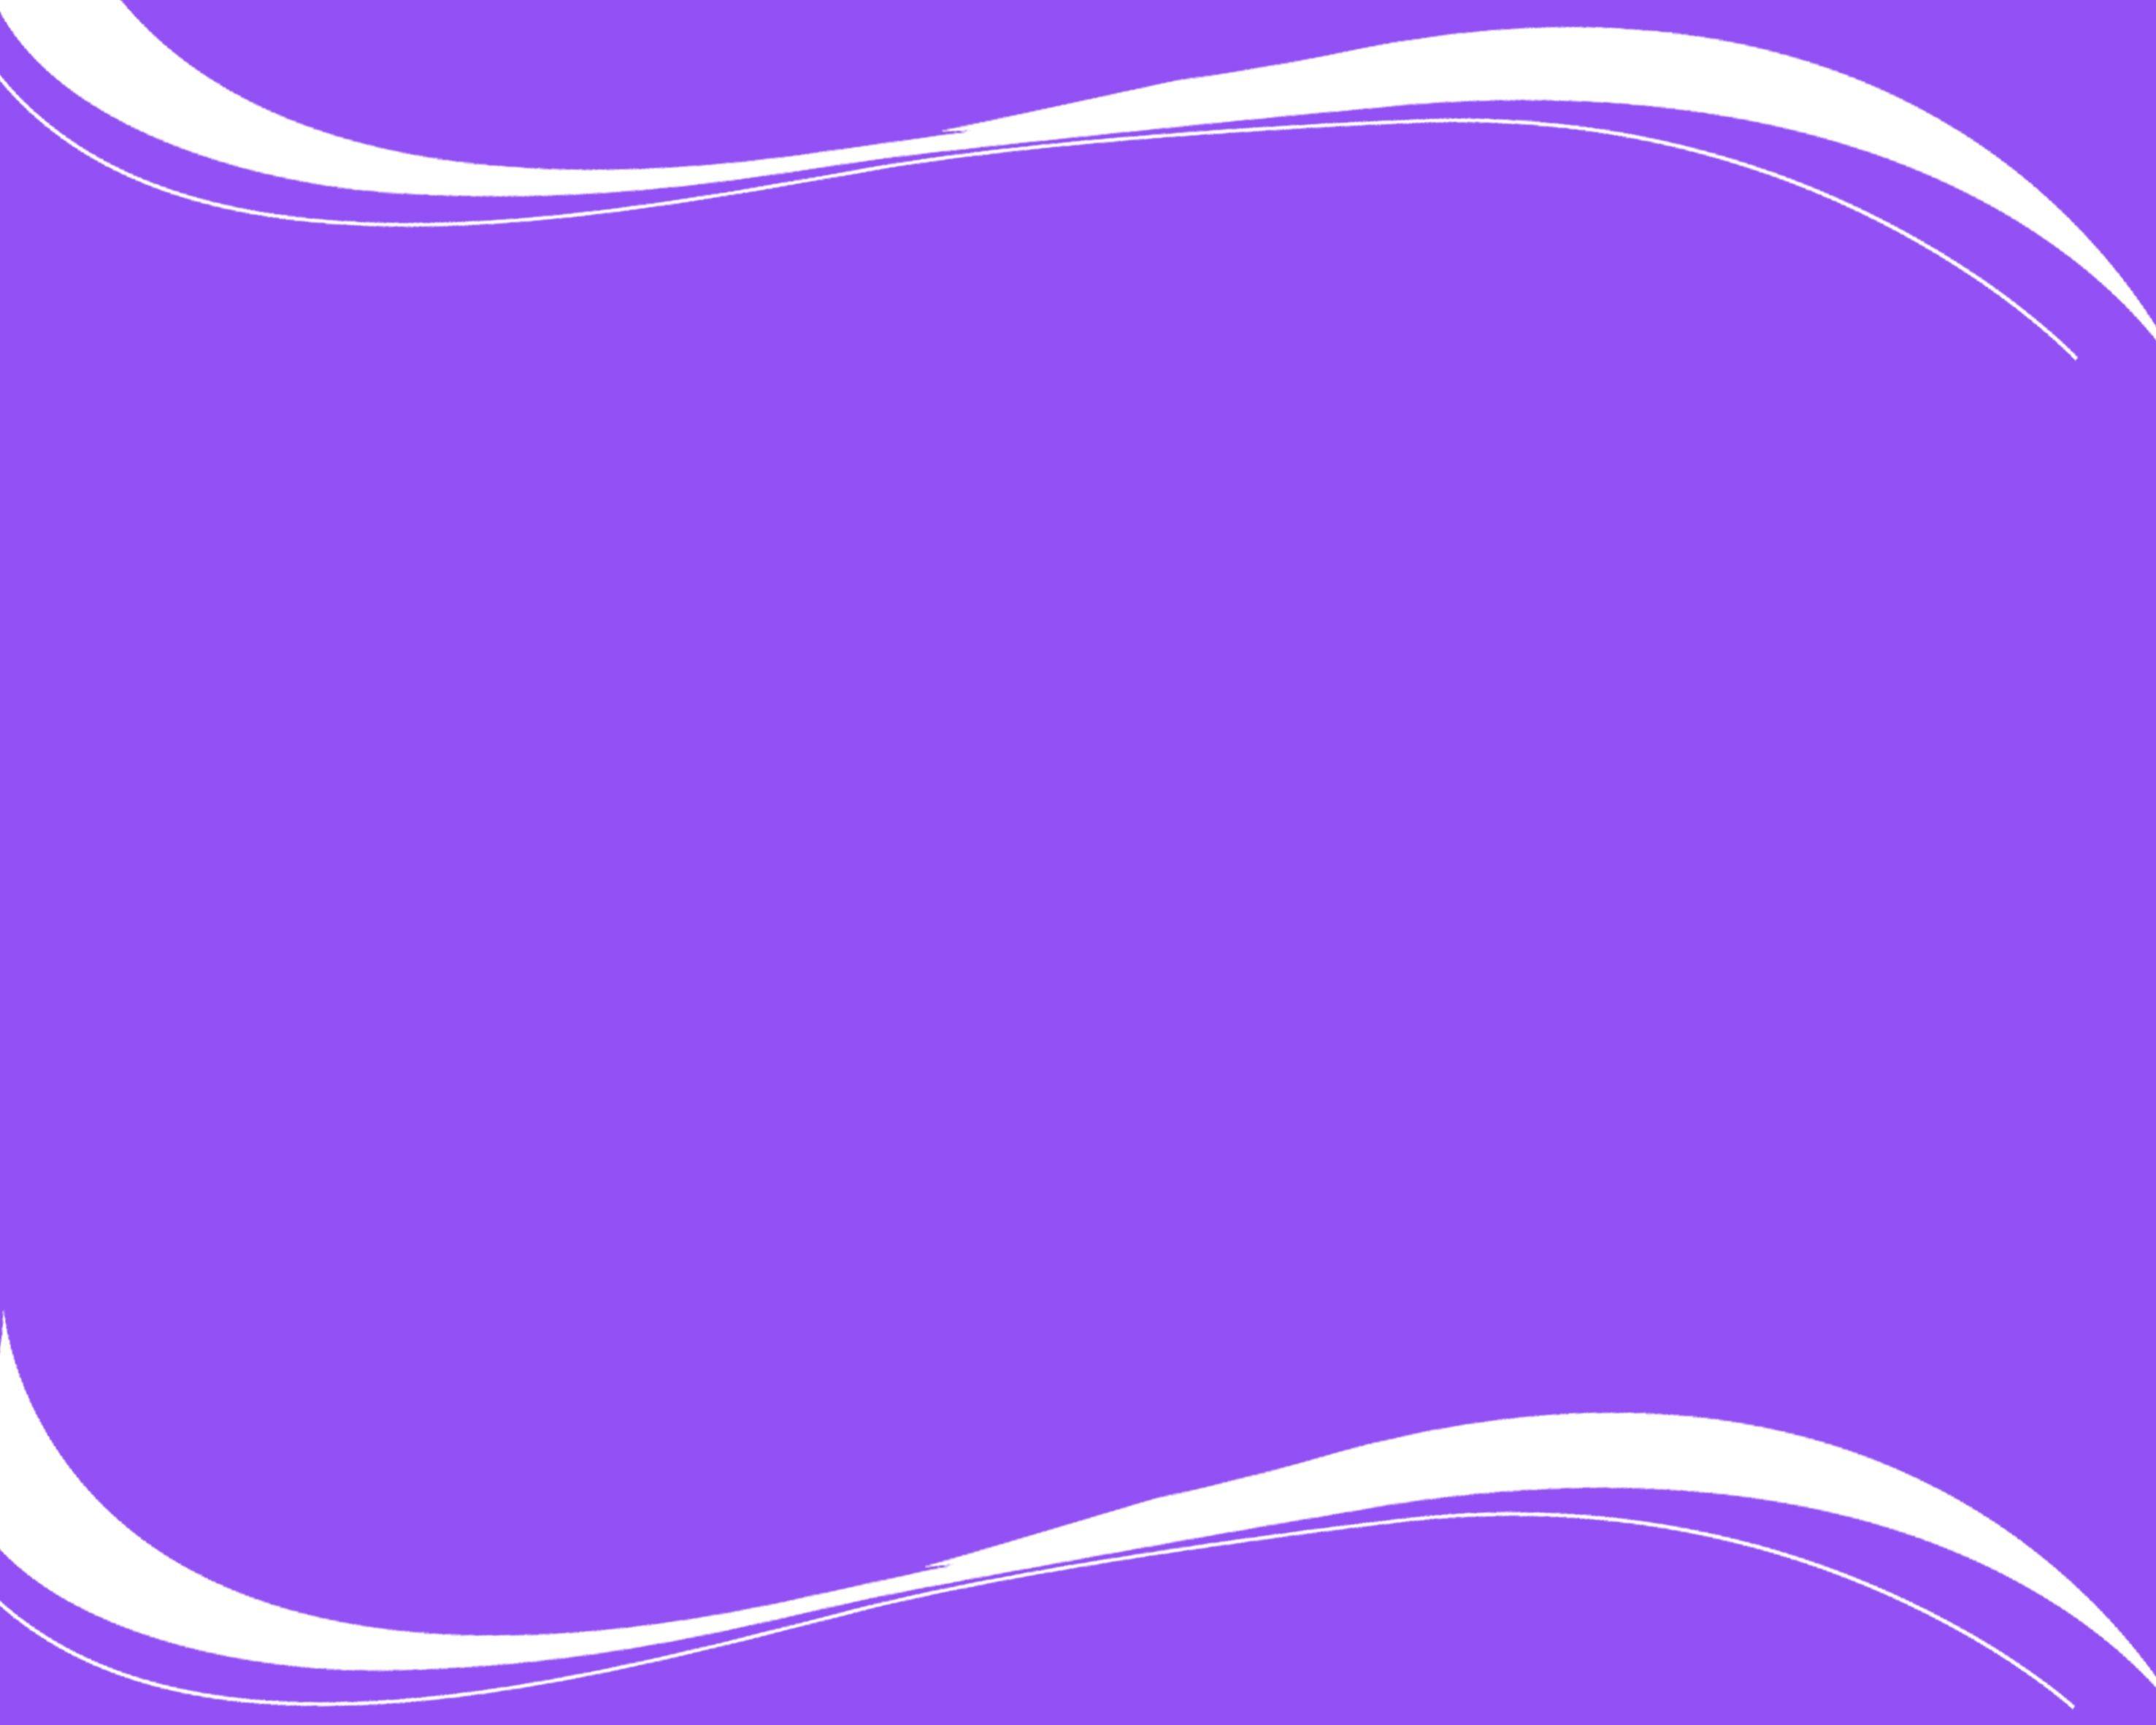 Purple with White Waves Logo - Two white waves on a purple background free image